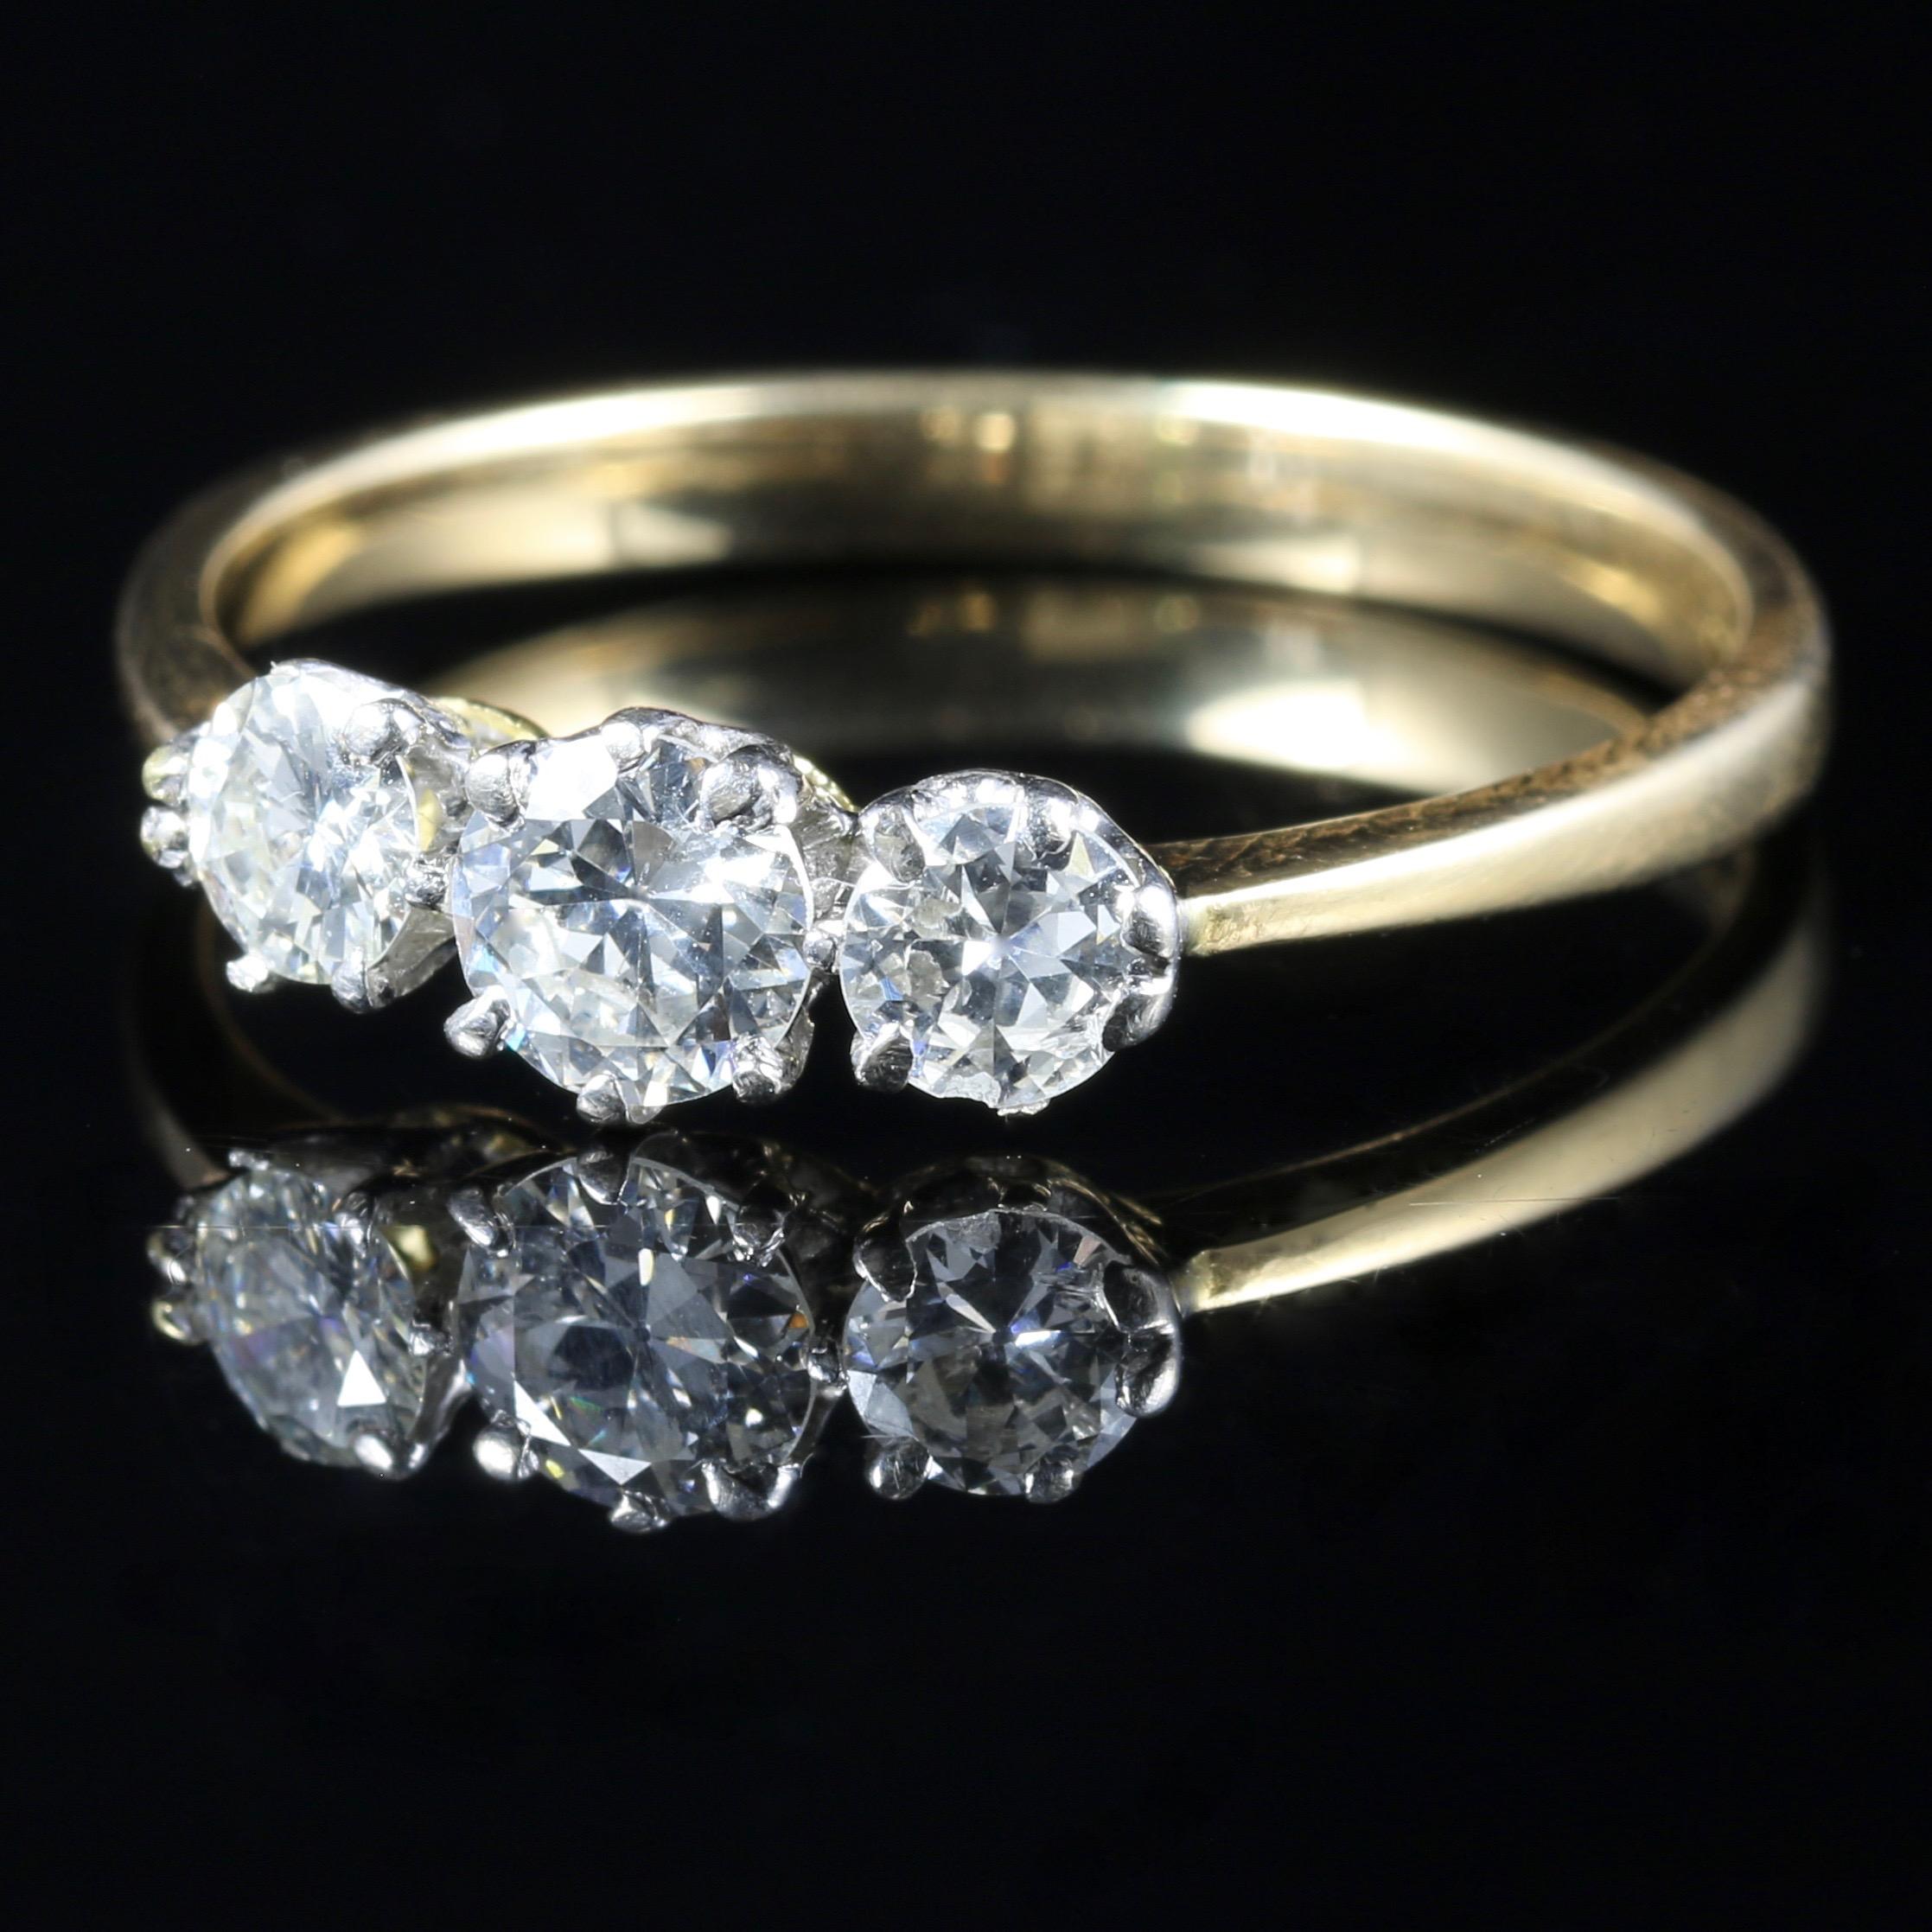 For more details please click continue reading down below...

A genuine antique Edwardian Diamond trilogy ring is steeped in history from the Edwardian period, Circa 1915.

Set in Platinum and 18ct Yellow Gold.

This lovely ring is set with 1ct of